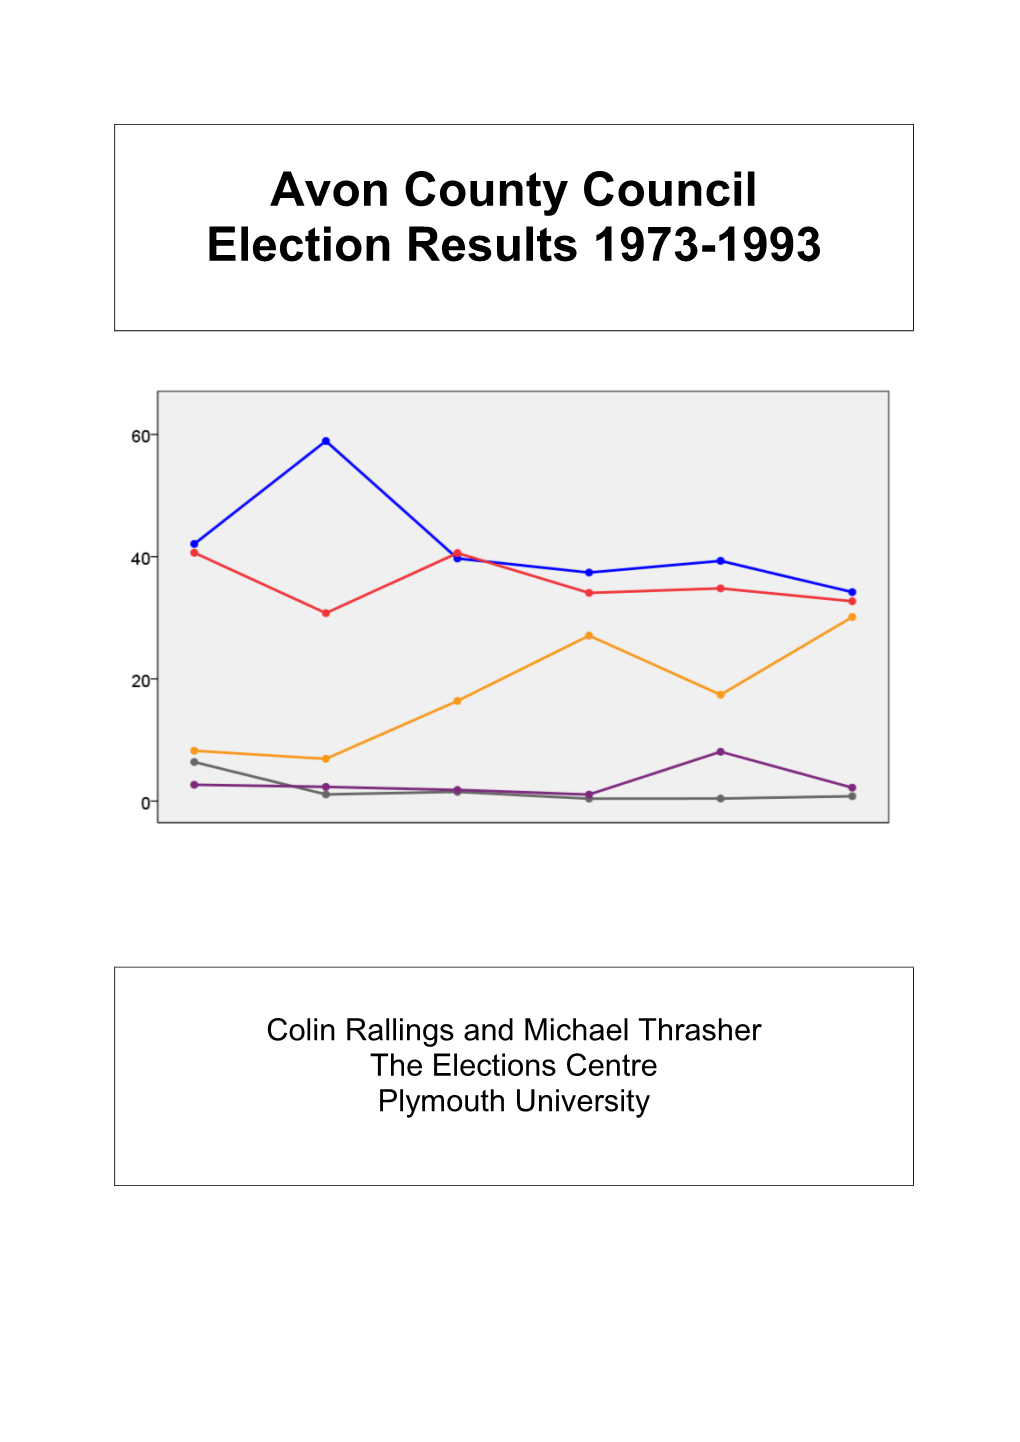 Avon County Council Election Results 1973-1993